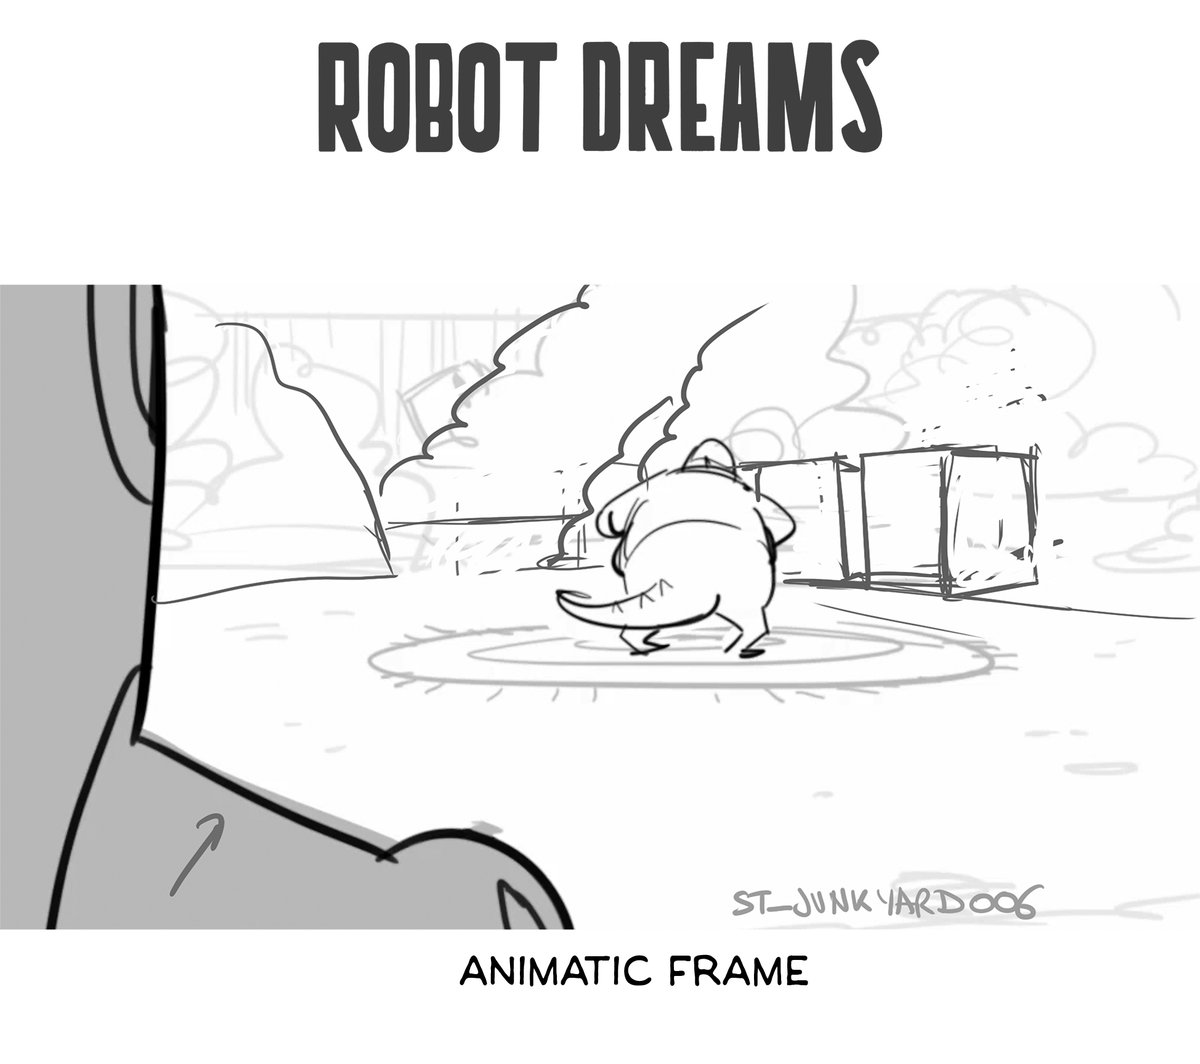 Another angle in the #RobotDreams sequence in Eddie's Scrapyard. Once more, my design began from the foundation of the animatic frame & the art director's notes. I did a lot of research on real junkyards, details, & the real Willet's Point location, digested that—then winged it!